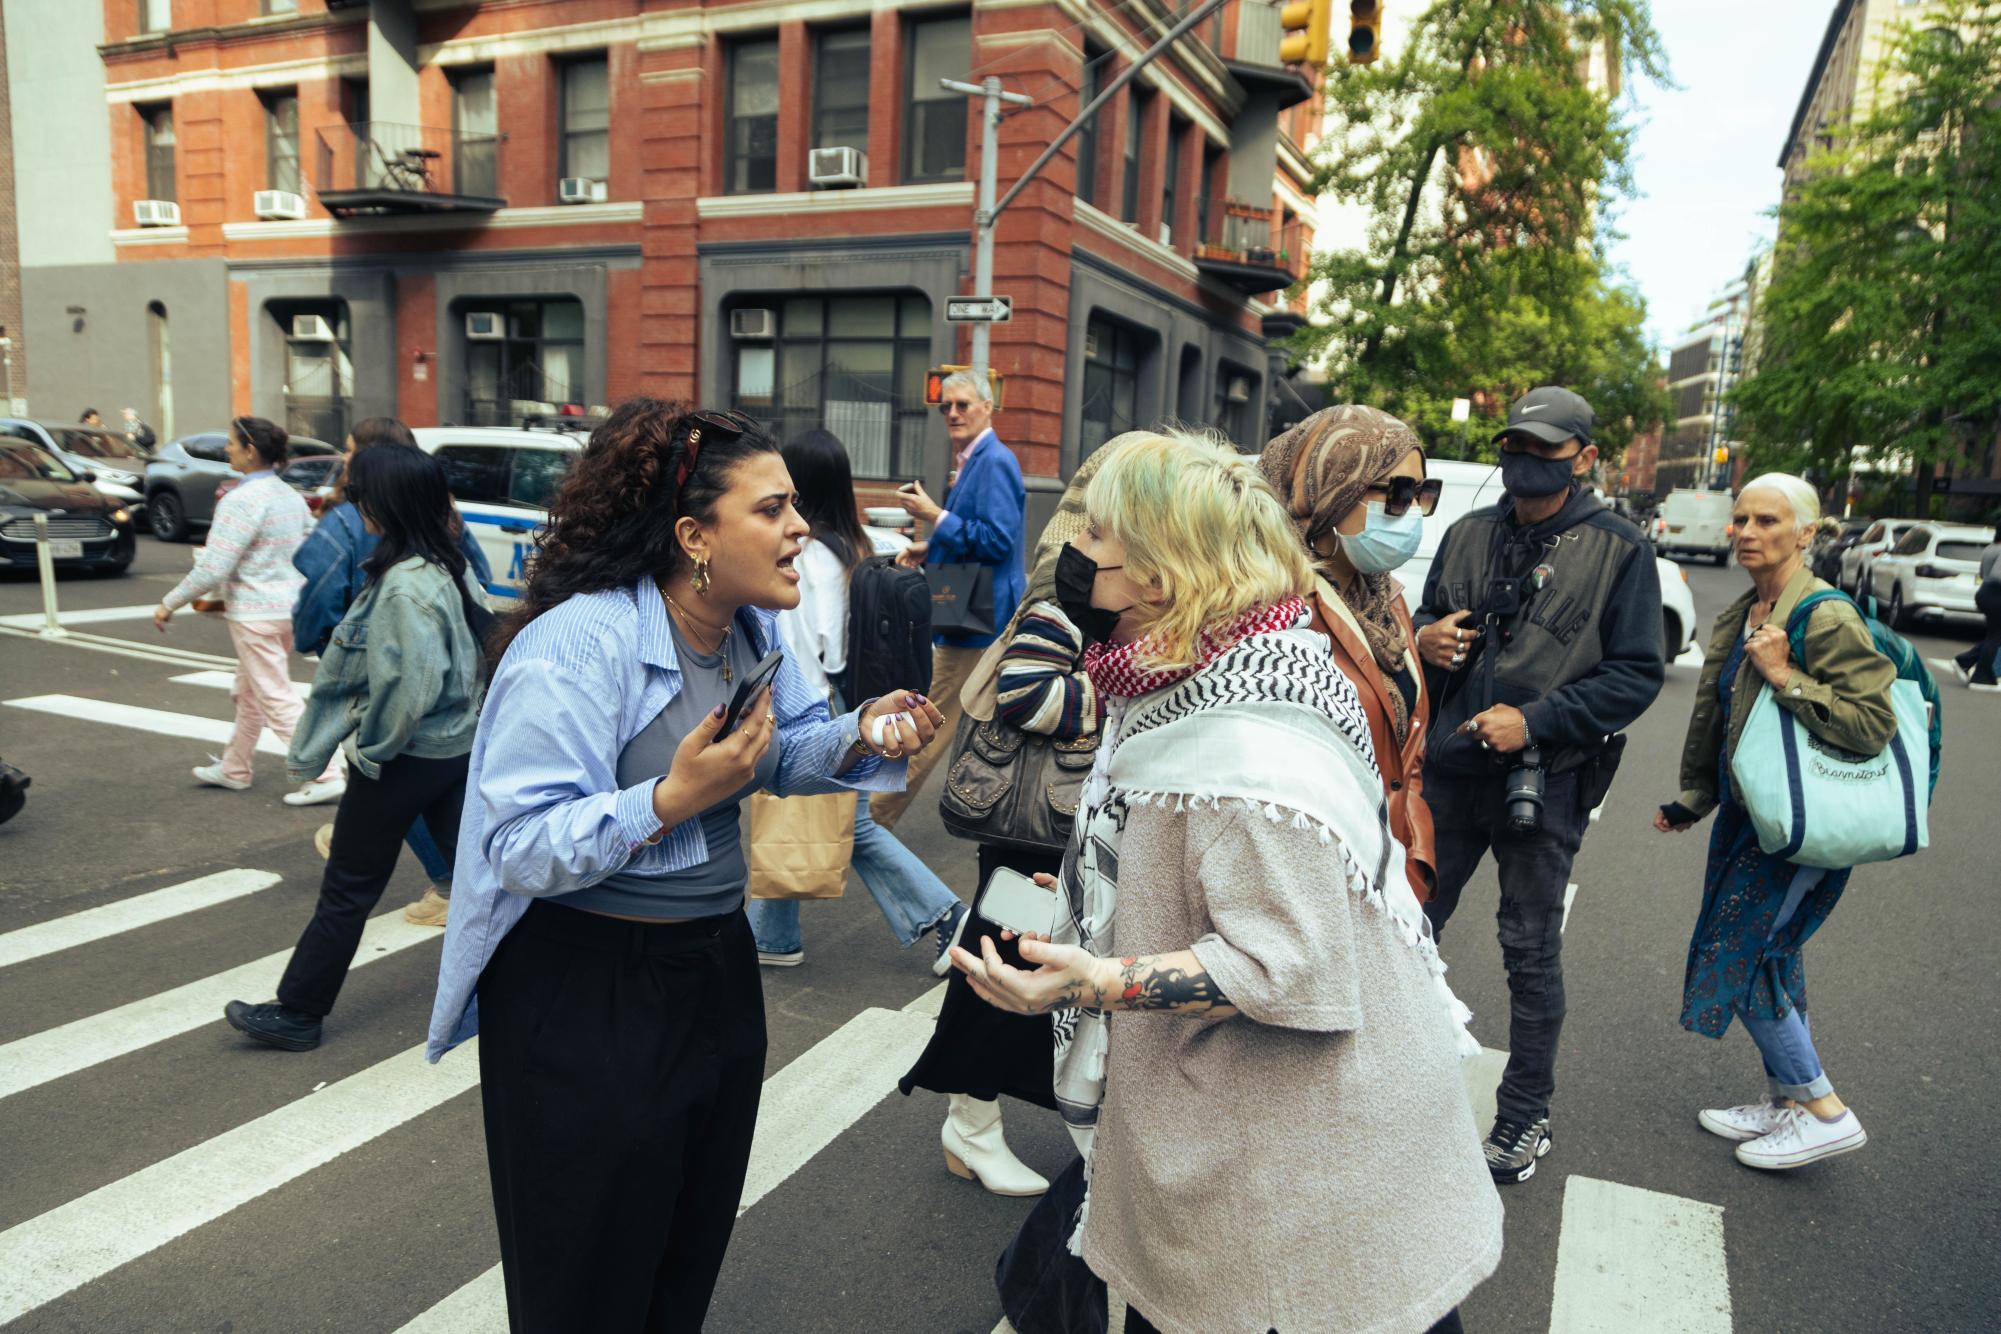 A protester and a counterprotester engage in verbal argument.